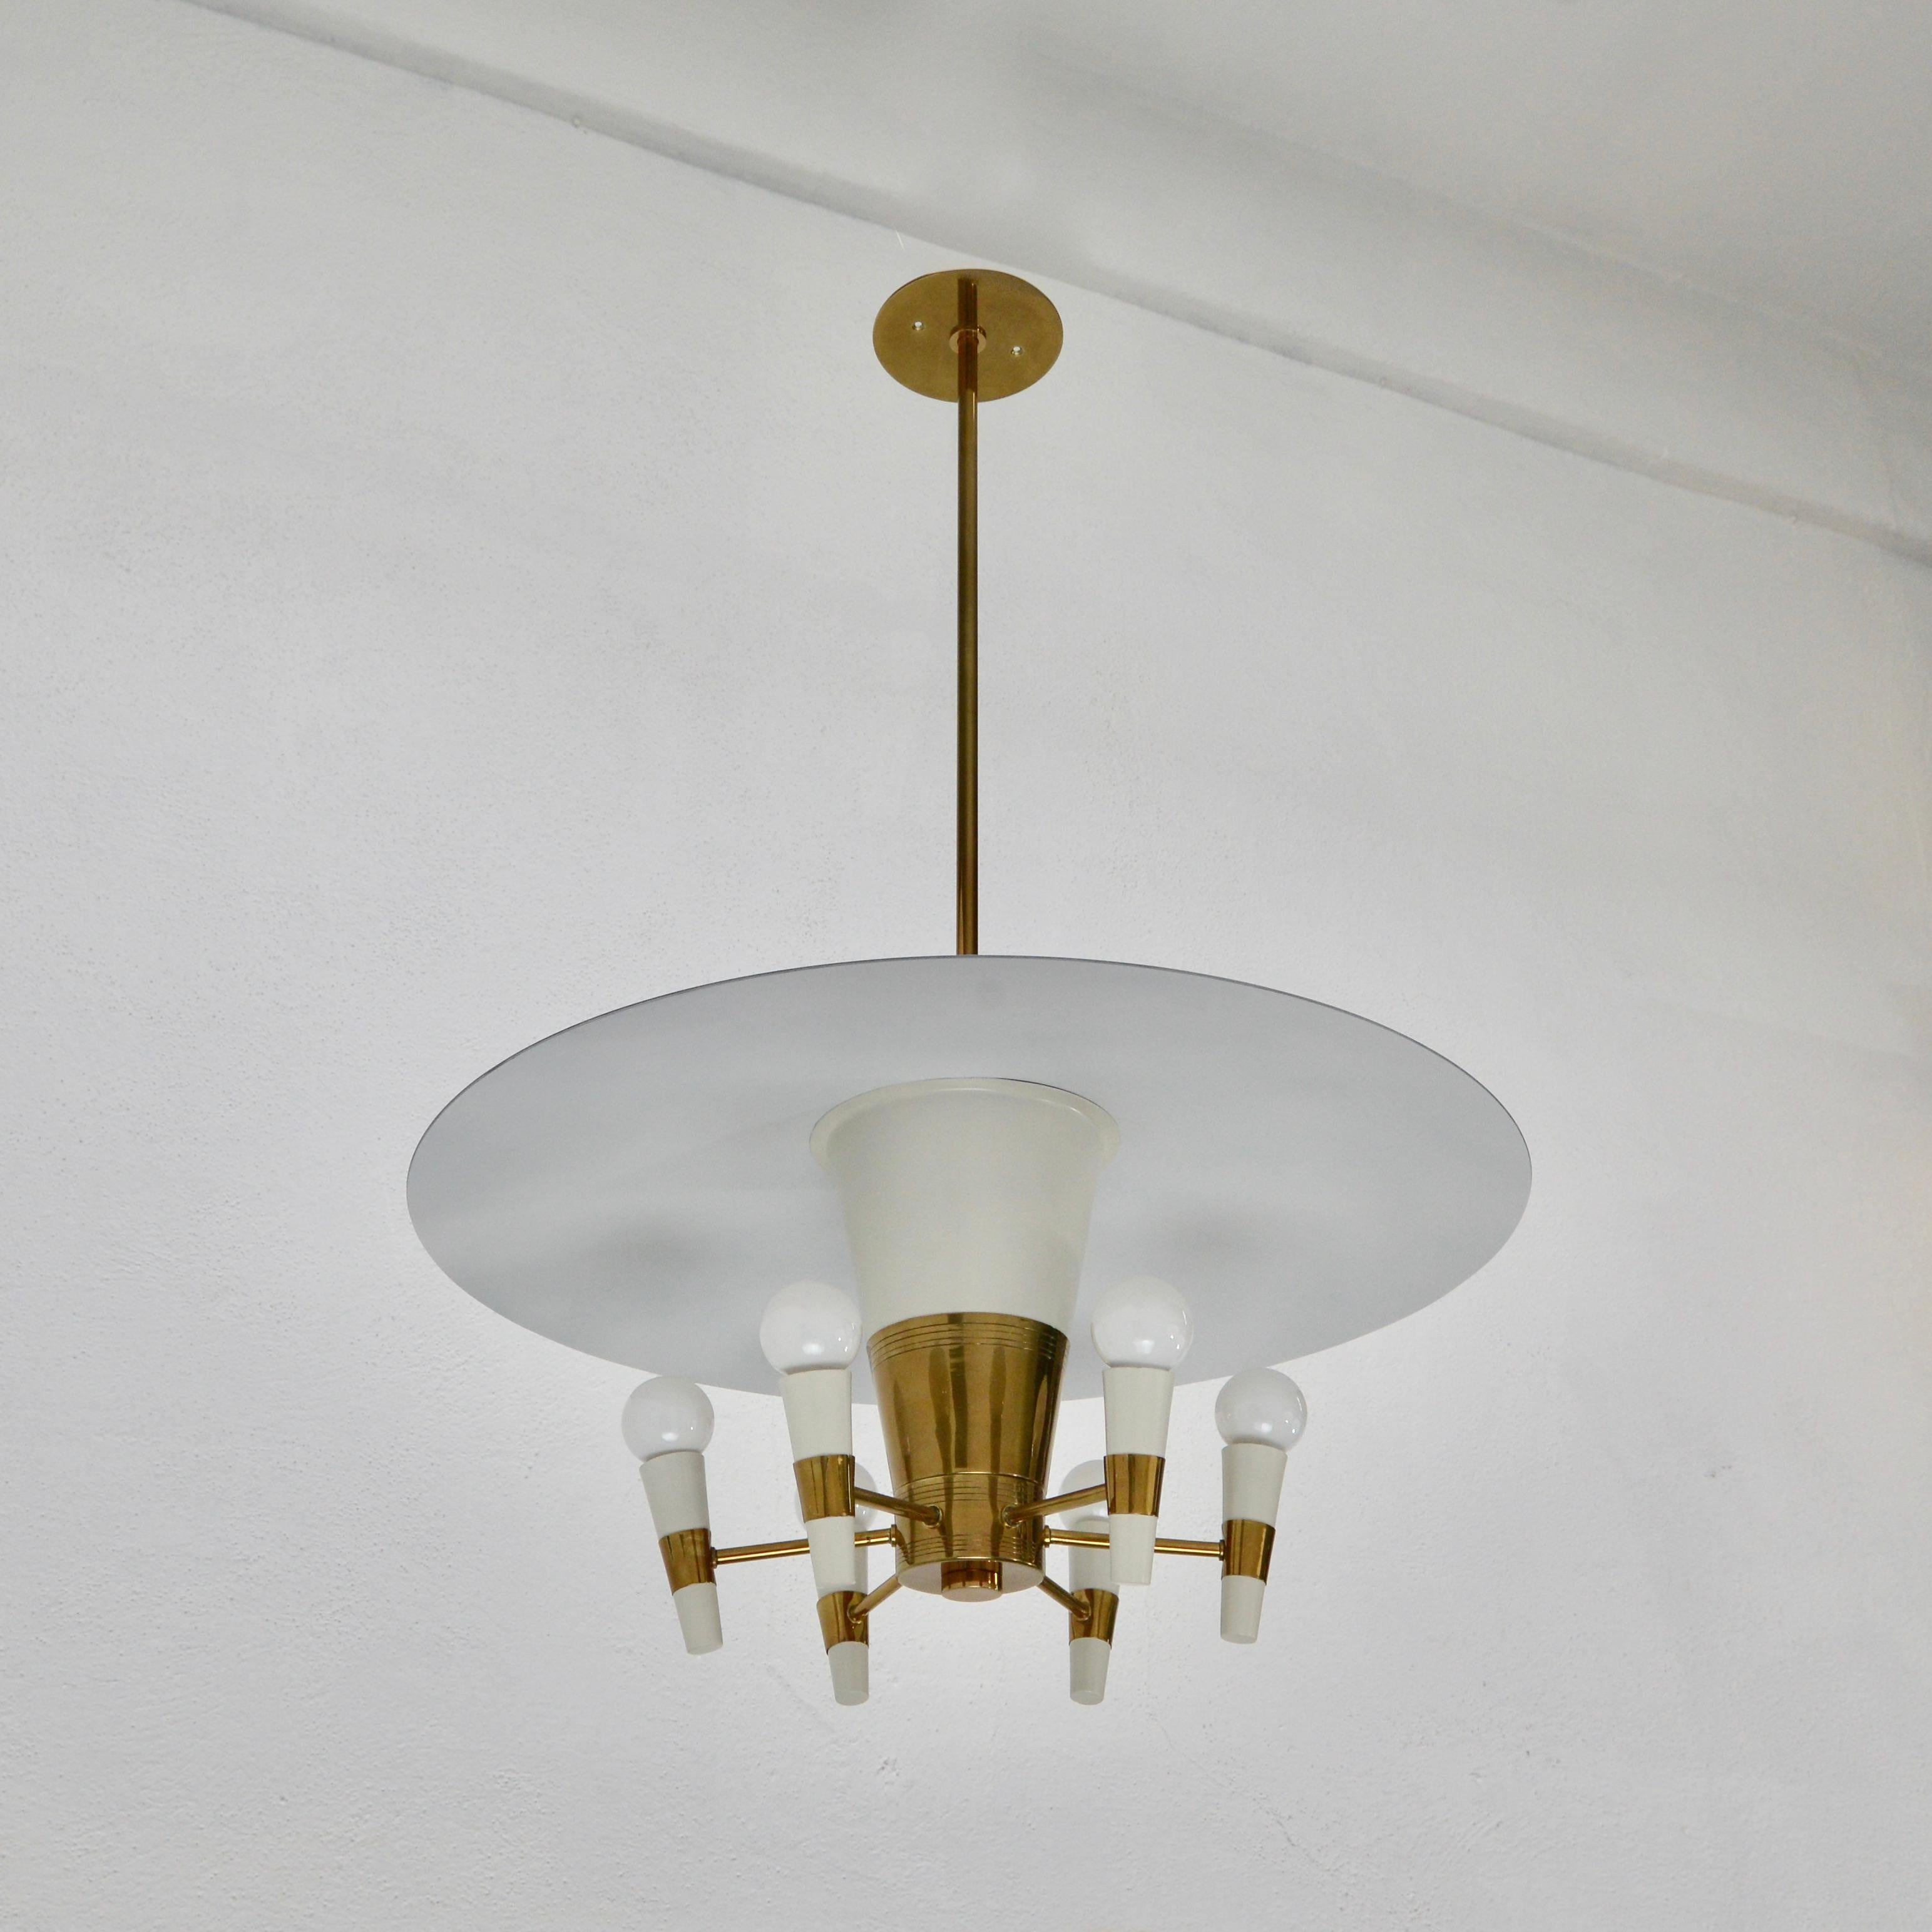 An elegant late 1940s dome pendant from Italy, Lightly patinated brass finish and painted aluminum. Wired with 6-E26 medium based sockets for use in the US. Light bulbs included with order.
Measurements:
OAD: 36” can be adjusted
Diameter: